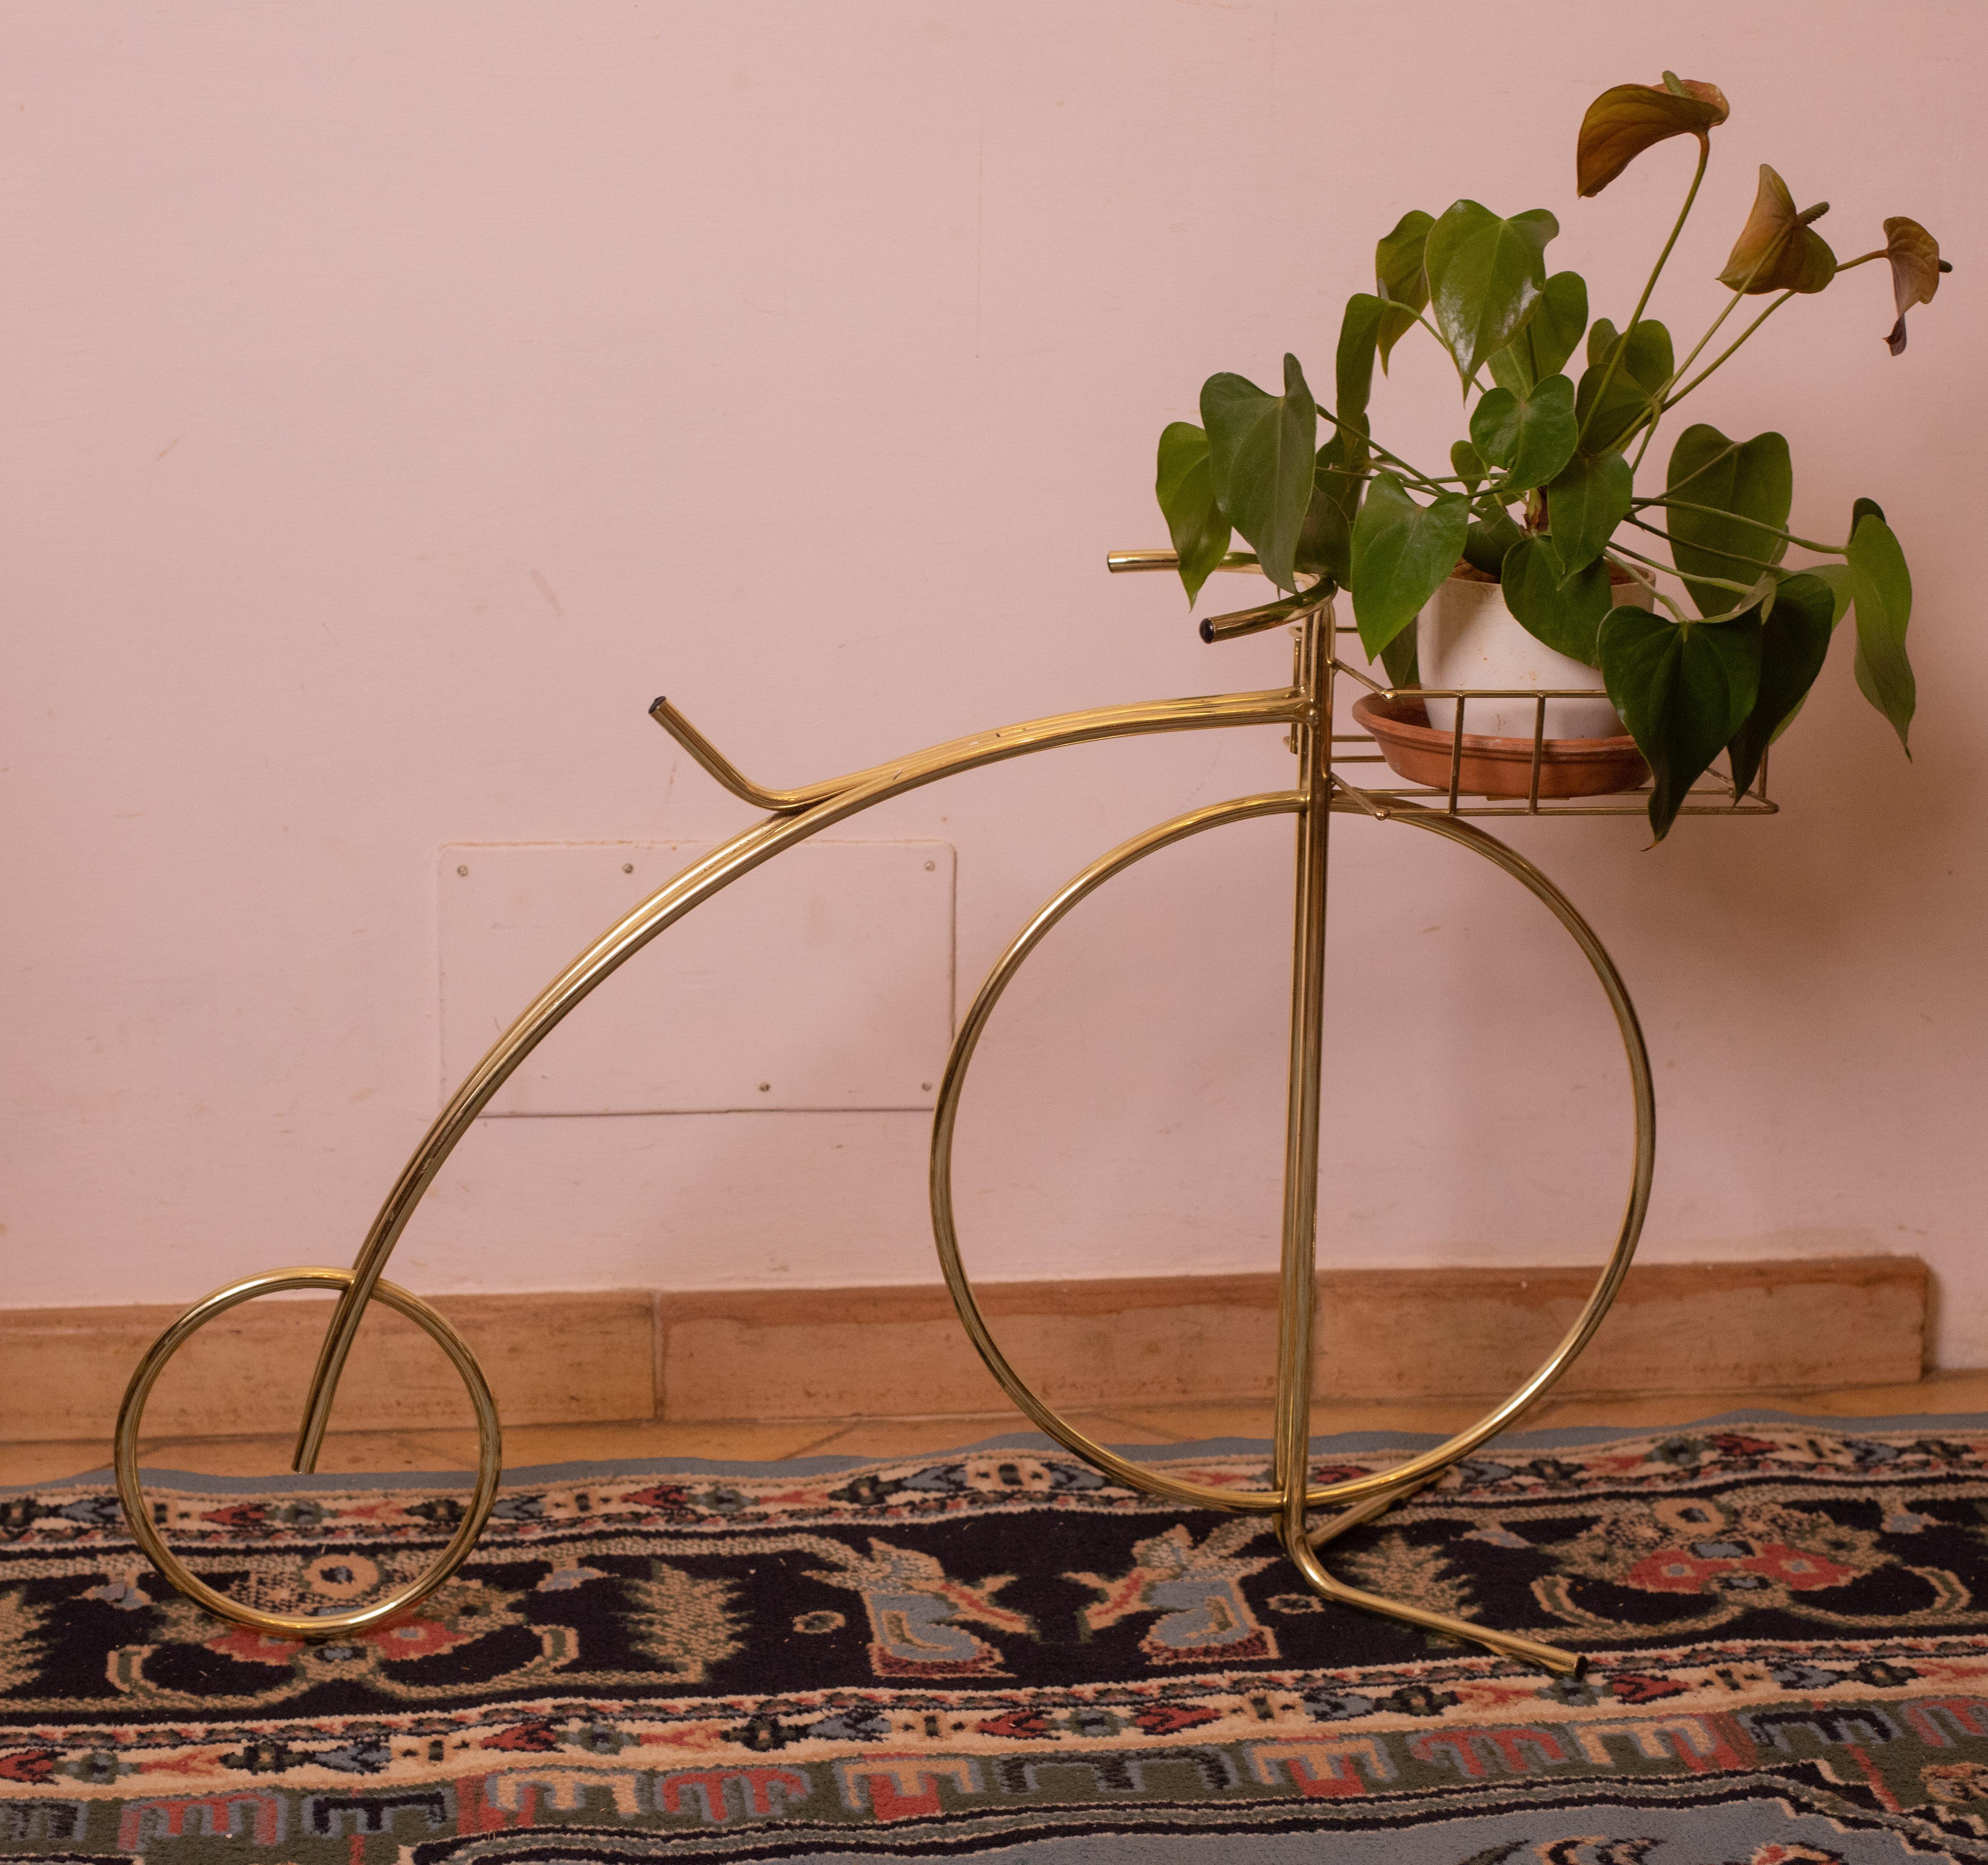 Stunning Italian modern antique decorative object in the shape of a bicycle.

As shown in the photo it can be used as a magazine rack or holder to beautify a space.

Measurements: 60 centimeters high, 30 centimeters wide, 85 centimeters deep.